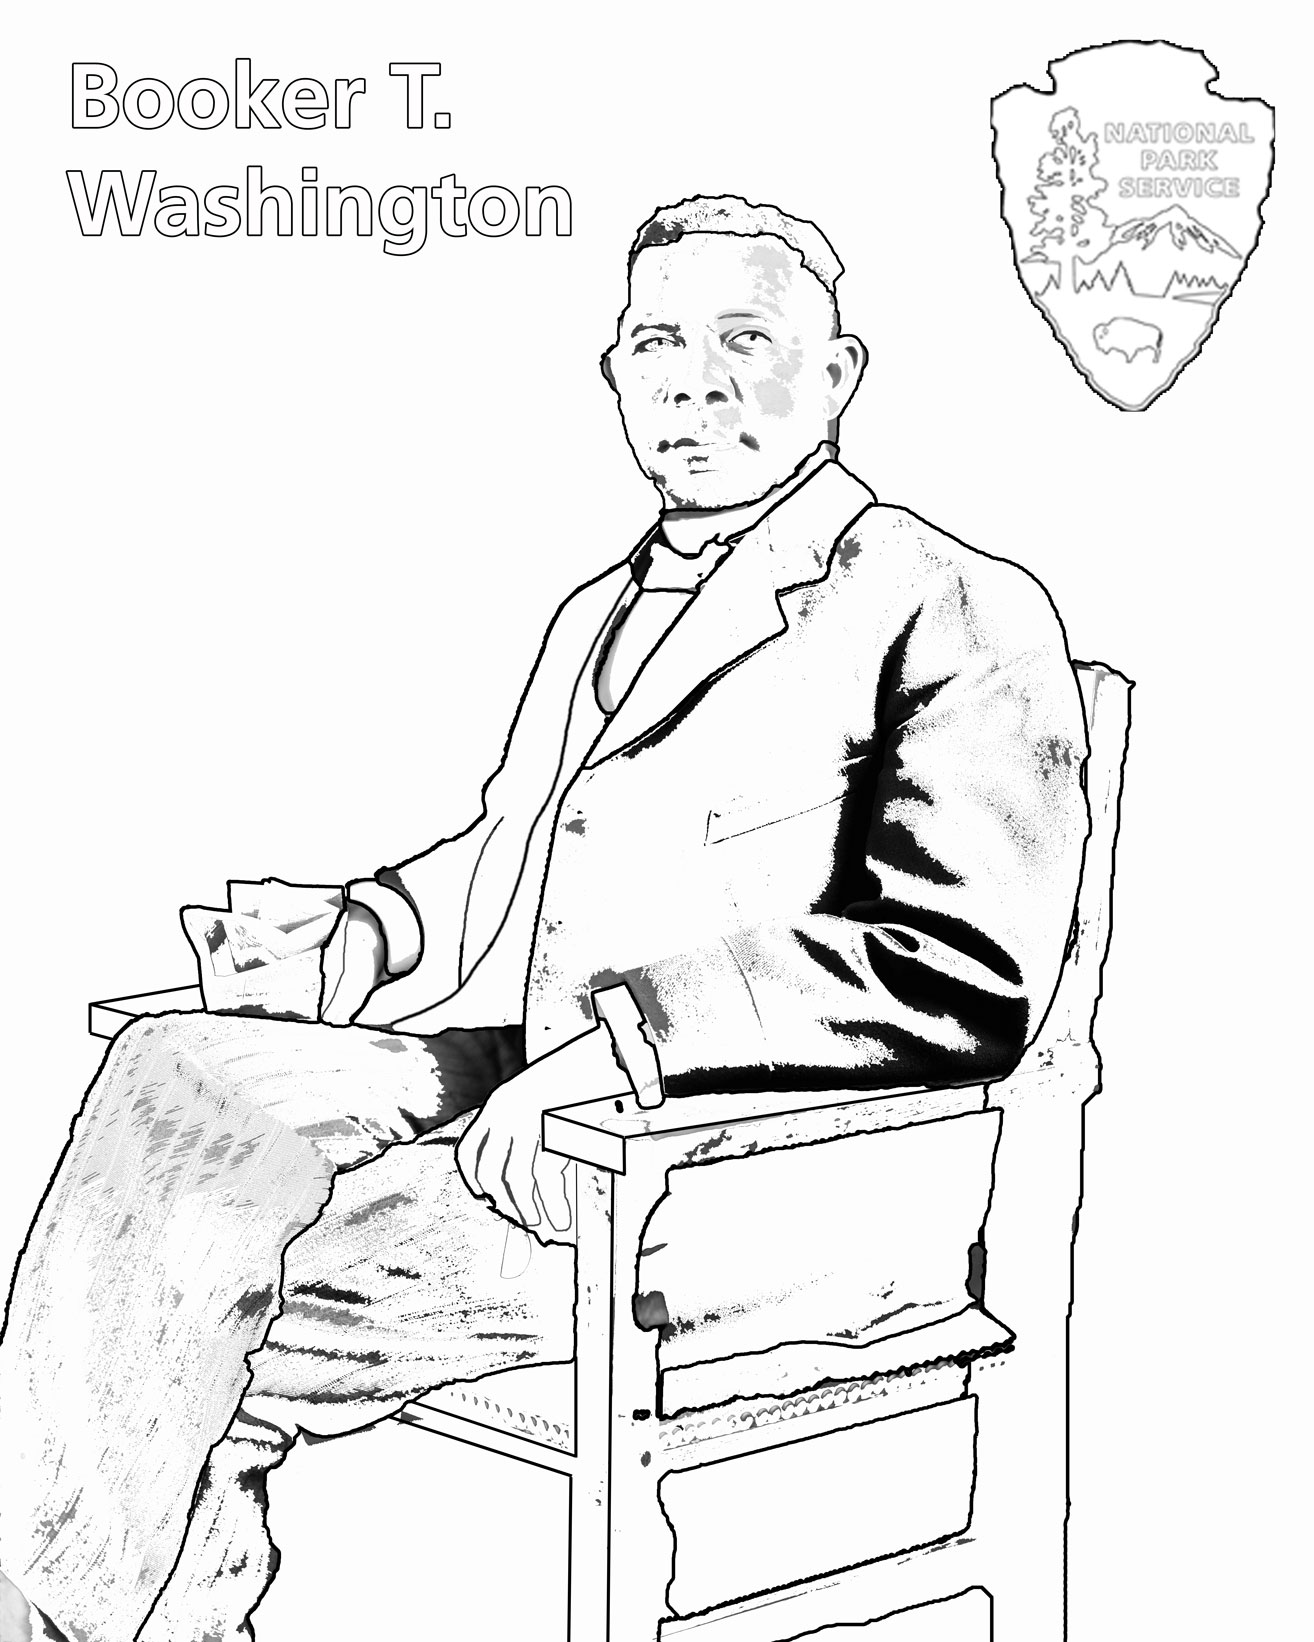 Booker Washington Read History 1 Coloring Page Http Www Nps